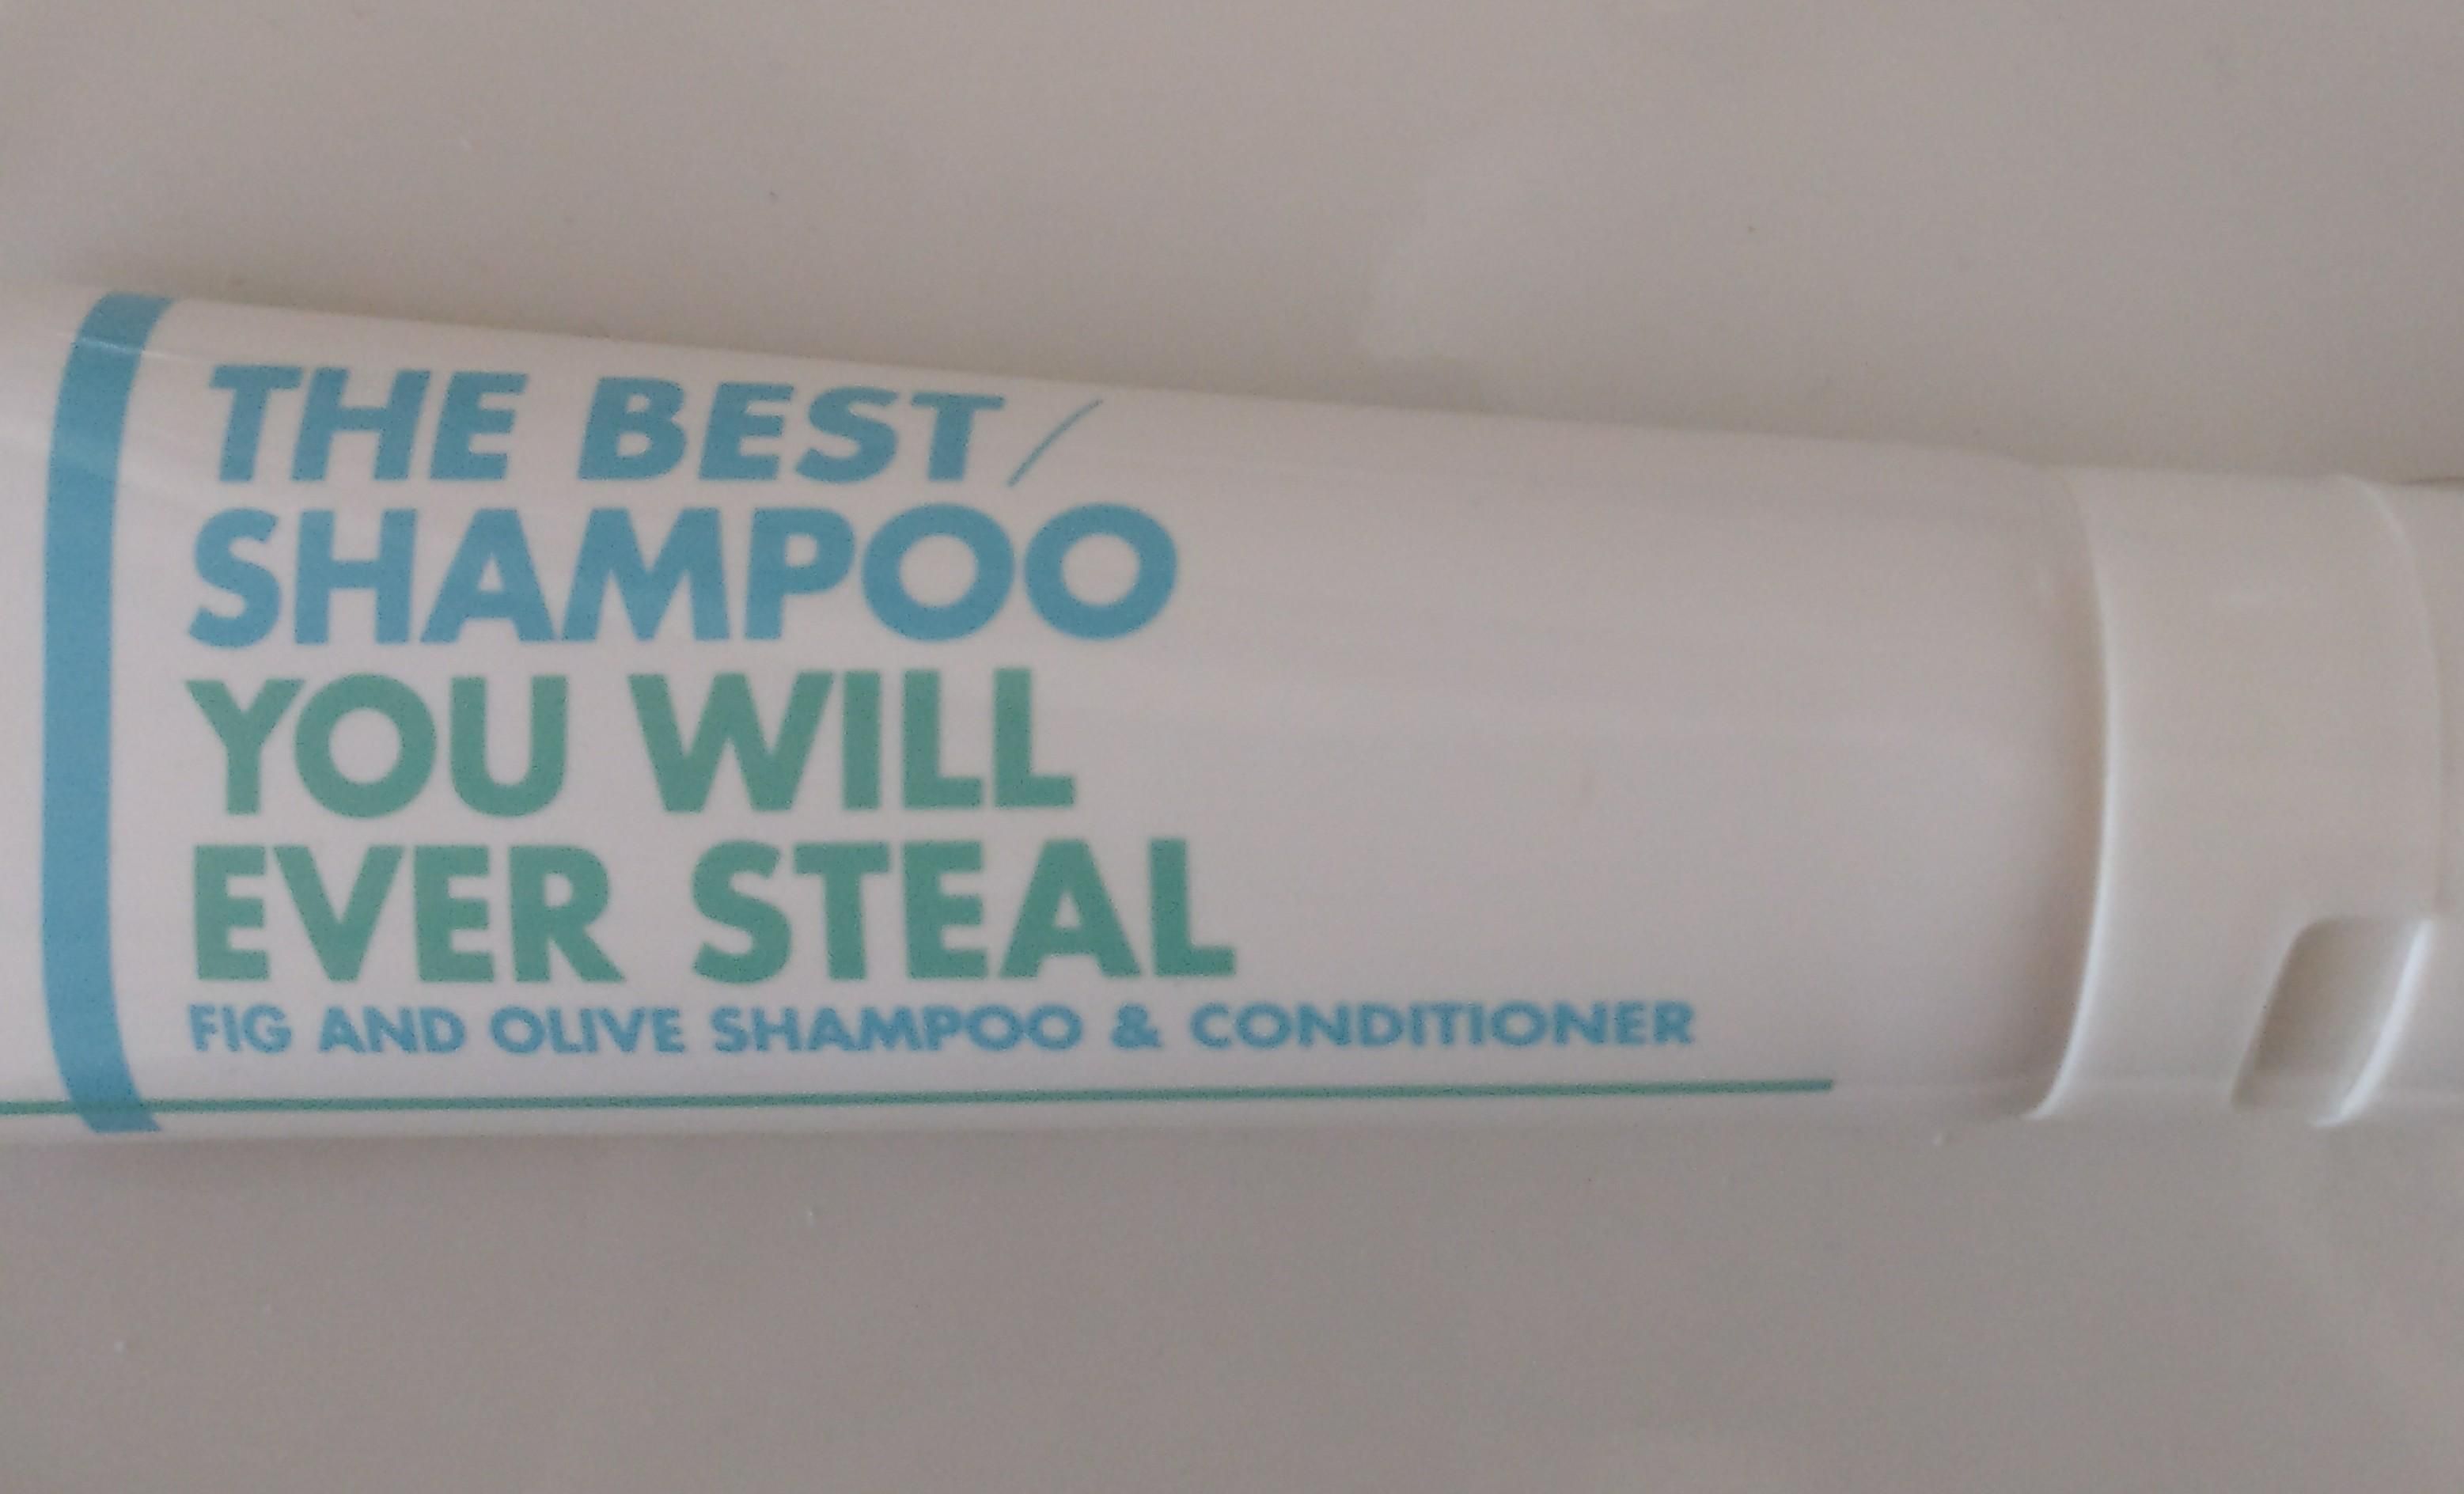 The shampoo at my hotel knows what's up.